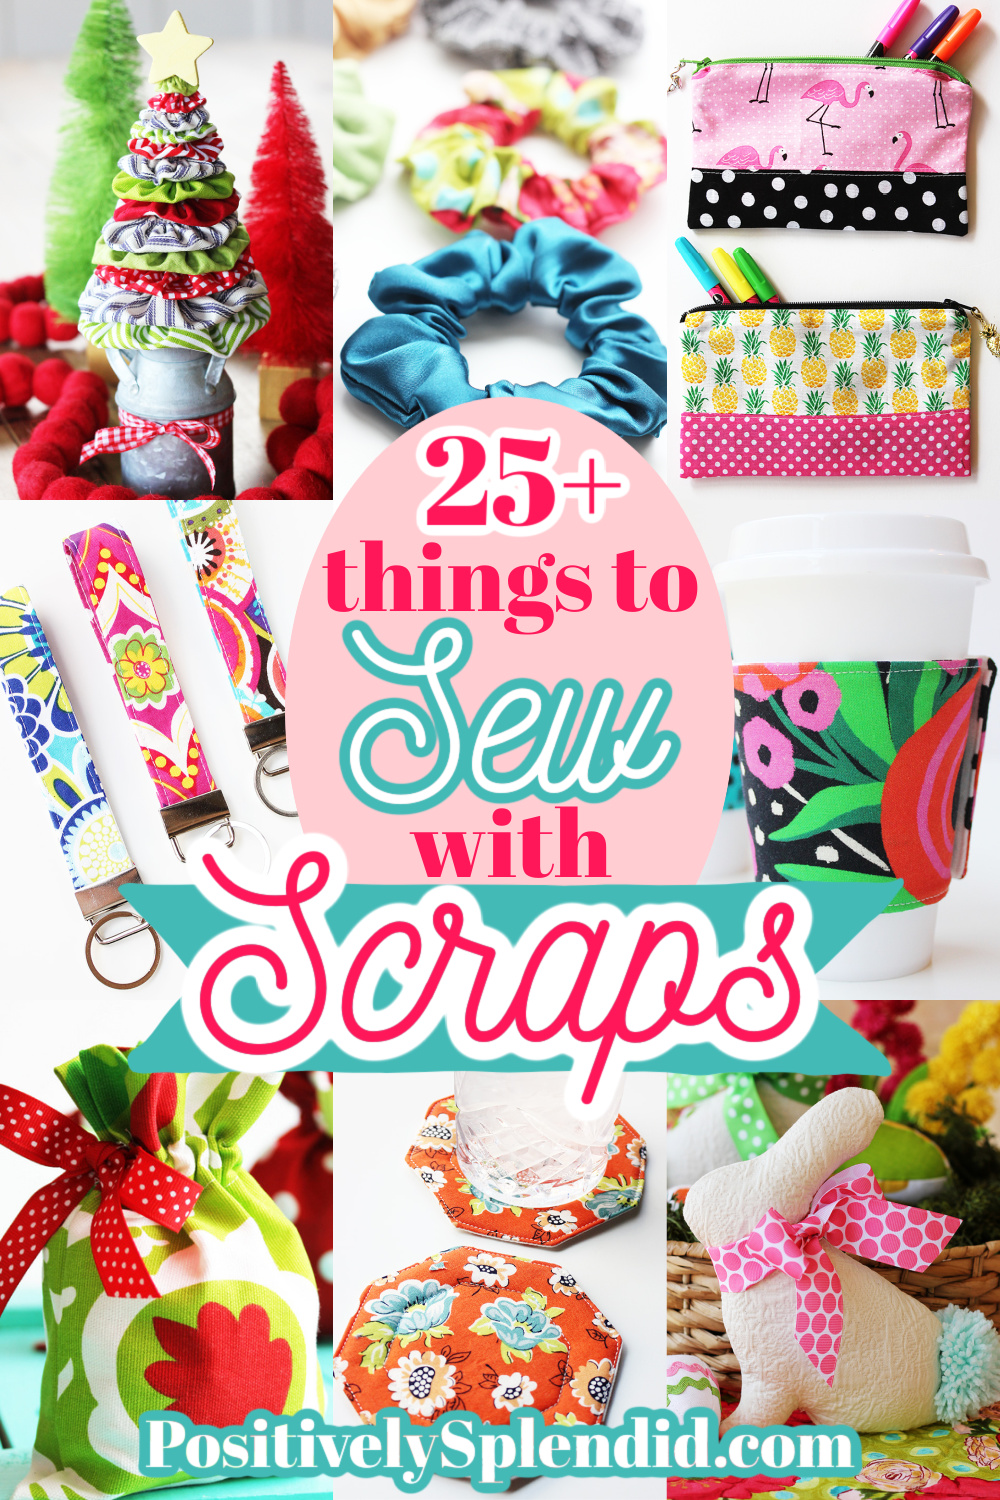 Fabric Scraps and Ways to Use Them: Fabric Scrap Projects